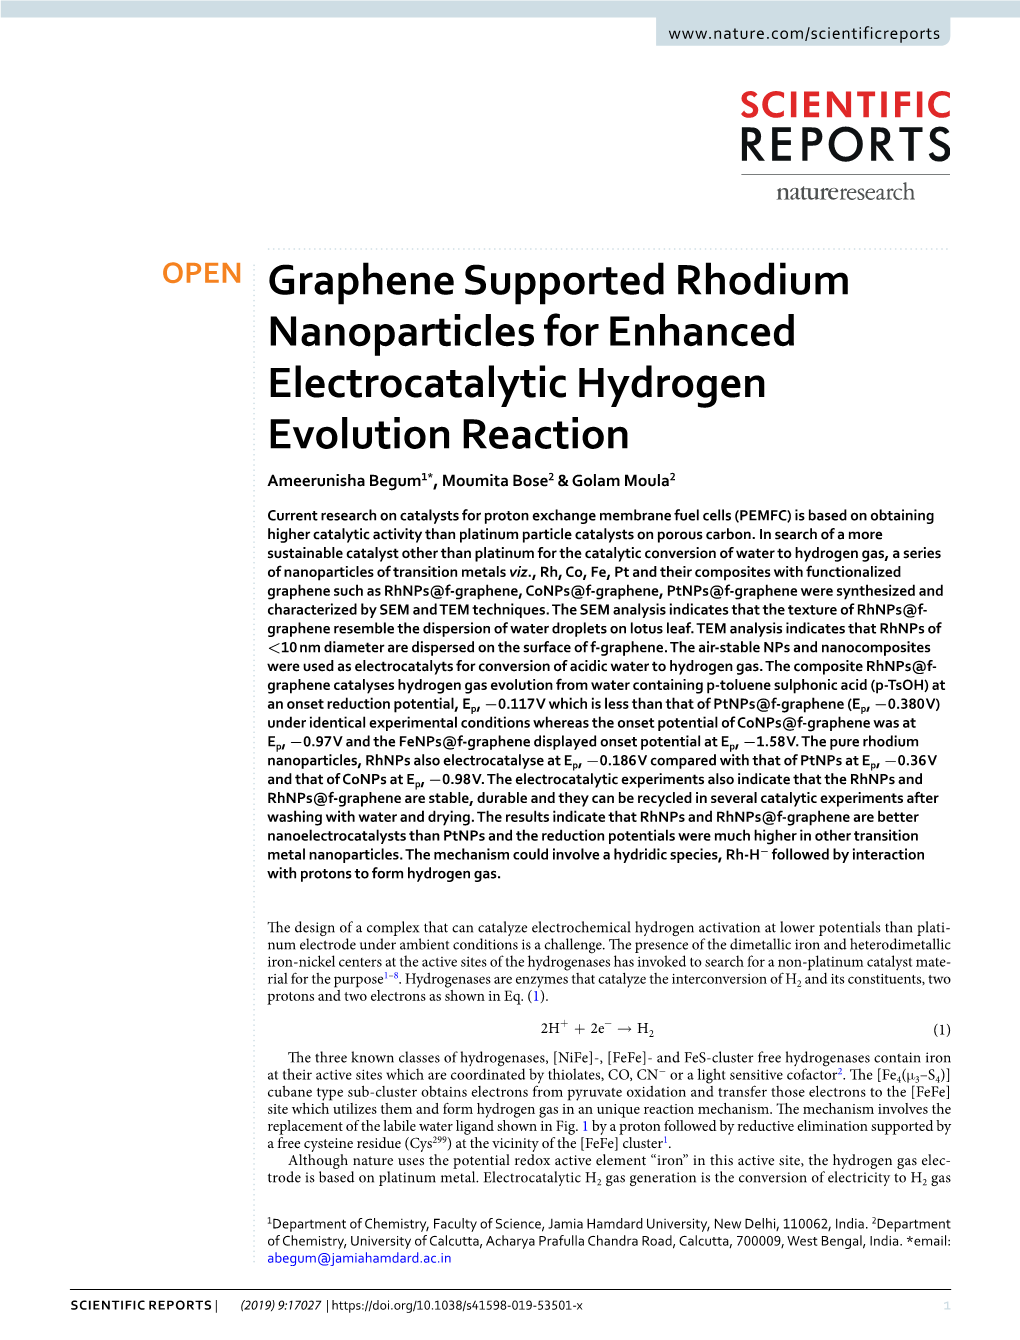 Graphene Supported Rhodium Nanoparticles for Enhanced Electrocatalytic Hydrogen Evolution Reaction Ameerunisha Begum1*, Moumita Bose2 & Golam Moula2